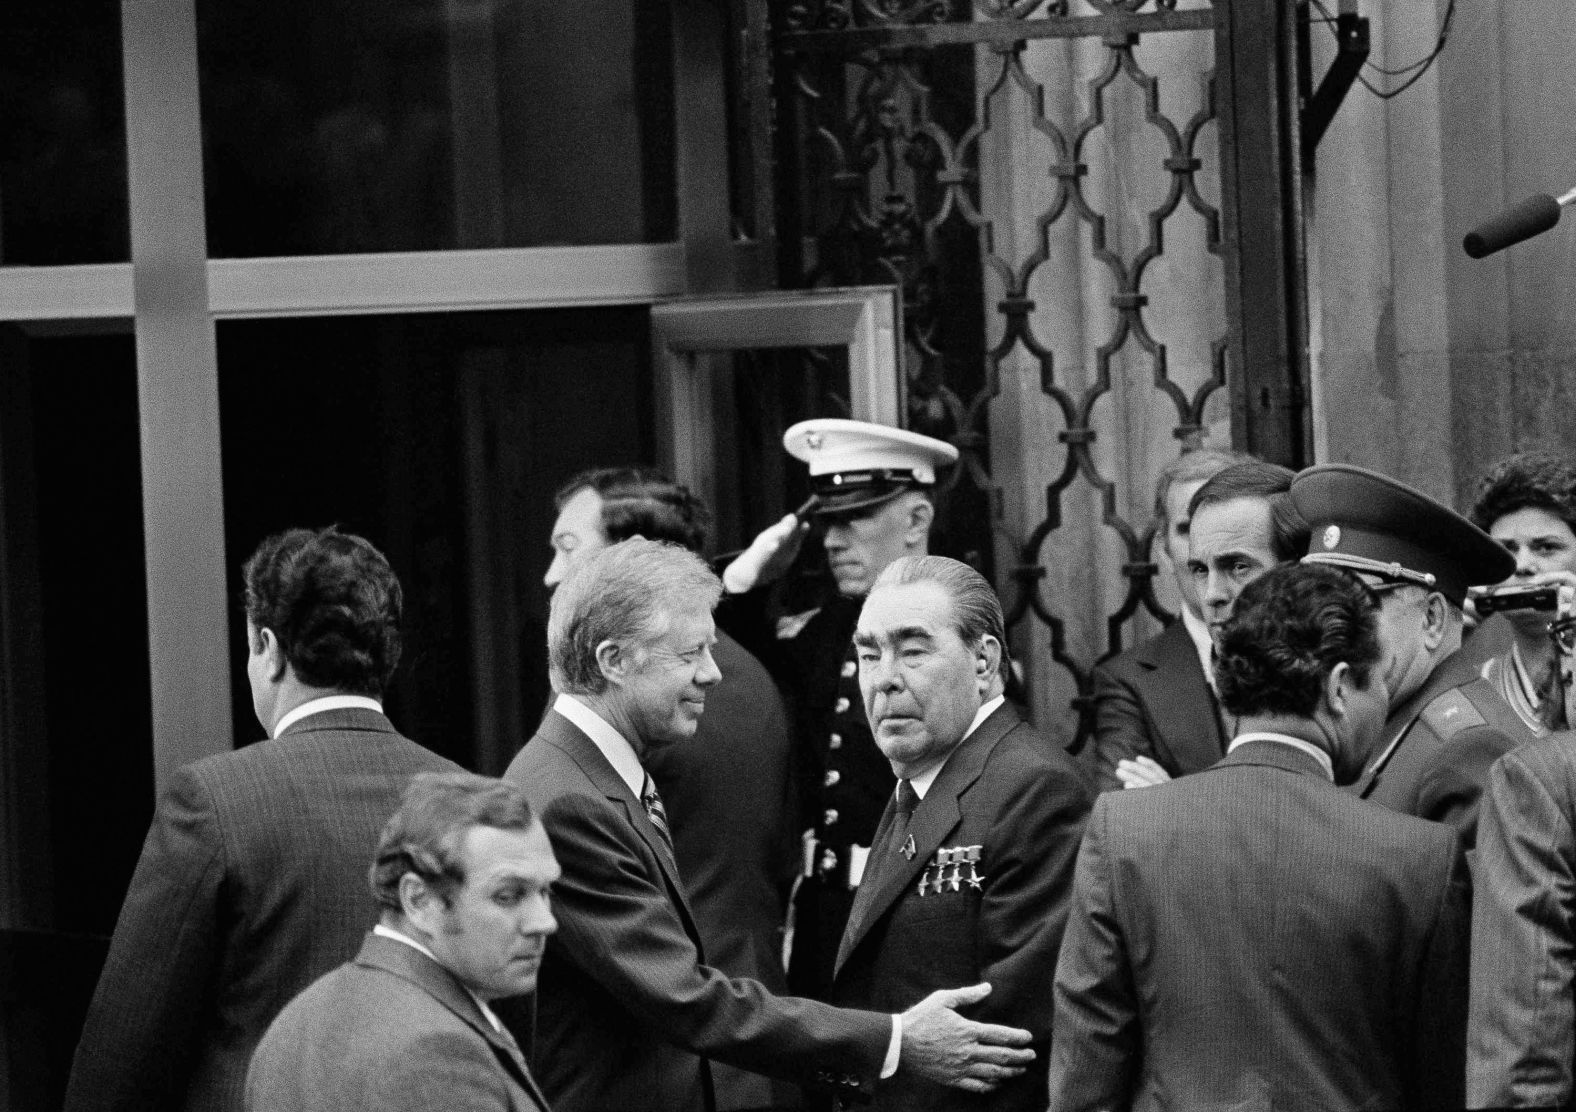 Carter walks with Soviet leader Leonid Brezhnev outside the US embassy in Vienna, Austria, in June 1979. They held private talks before heading to the Imperial Hofburg Palace to sign the SALT II nuclear treaty.